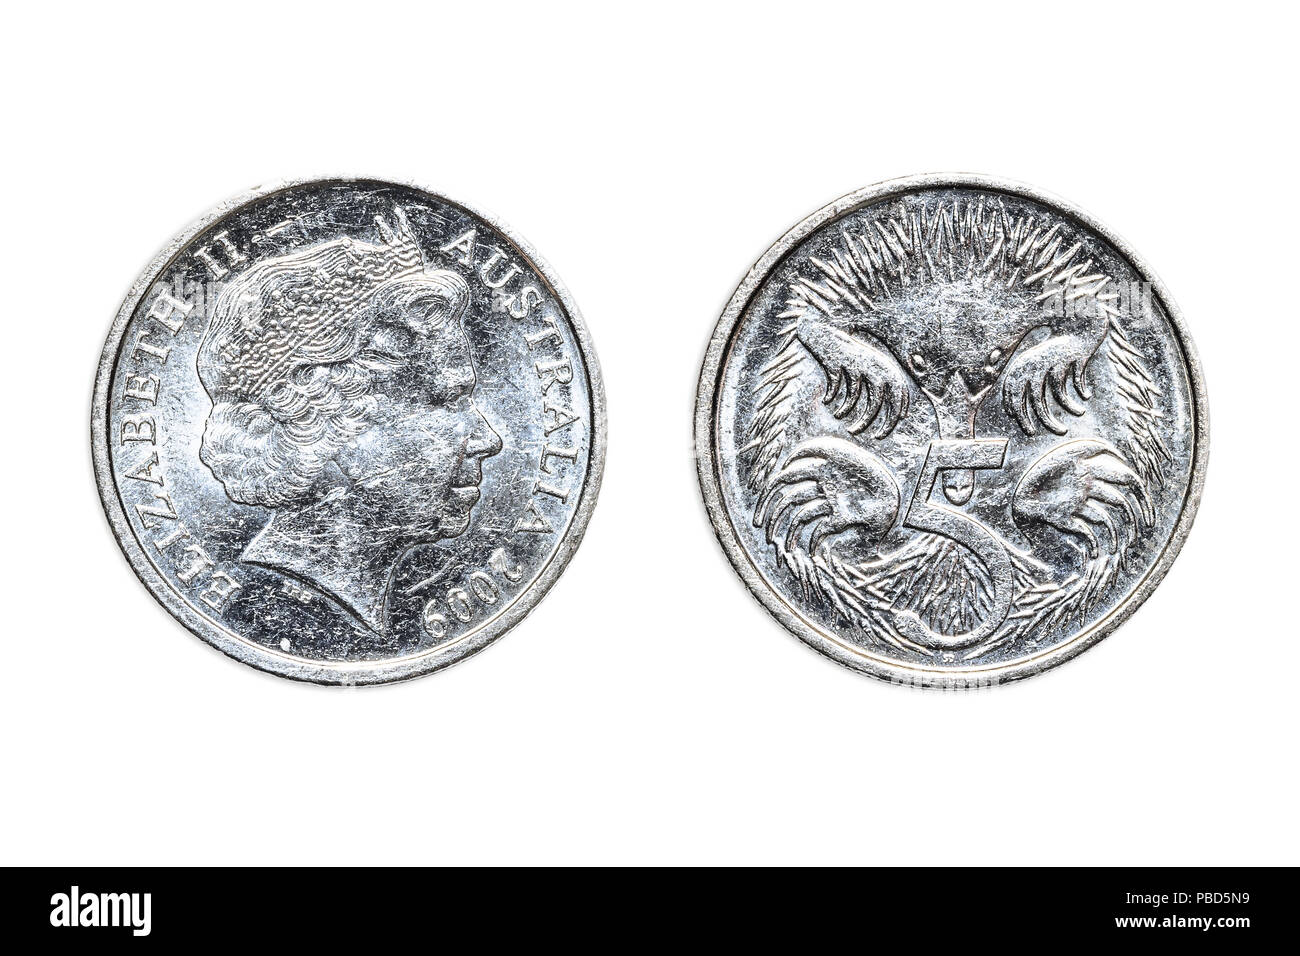 Double sides of Australian coin of 5 dollars cents of Australia, AUD currency, close up of the head and tail sides of Queen Elizabeth II and echidna a Stock Photo